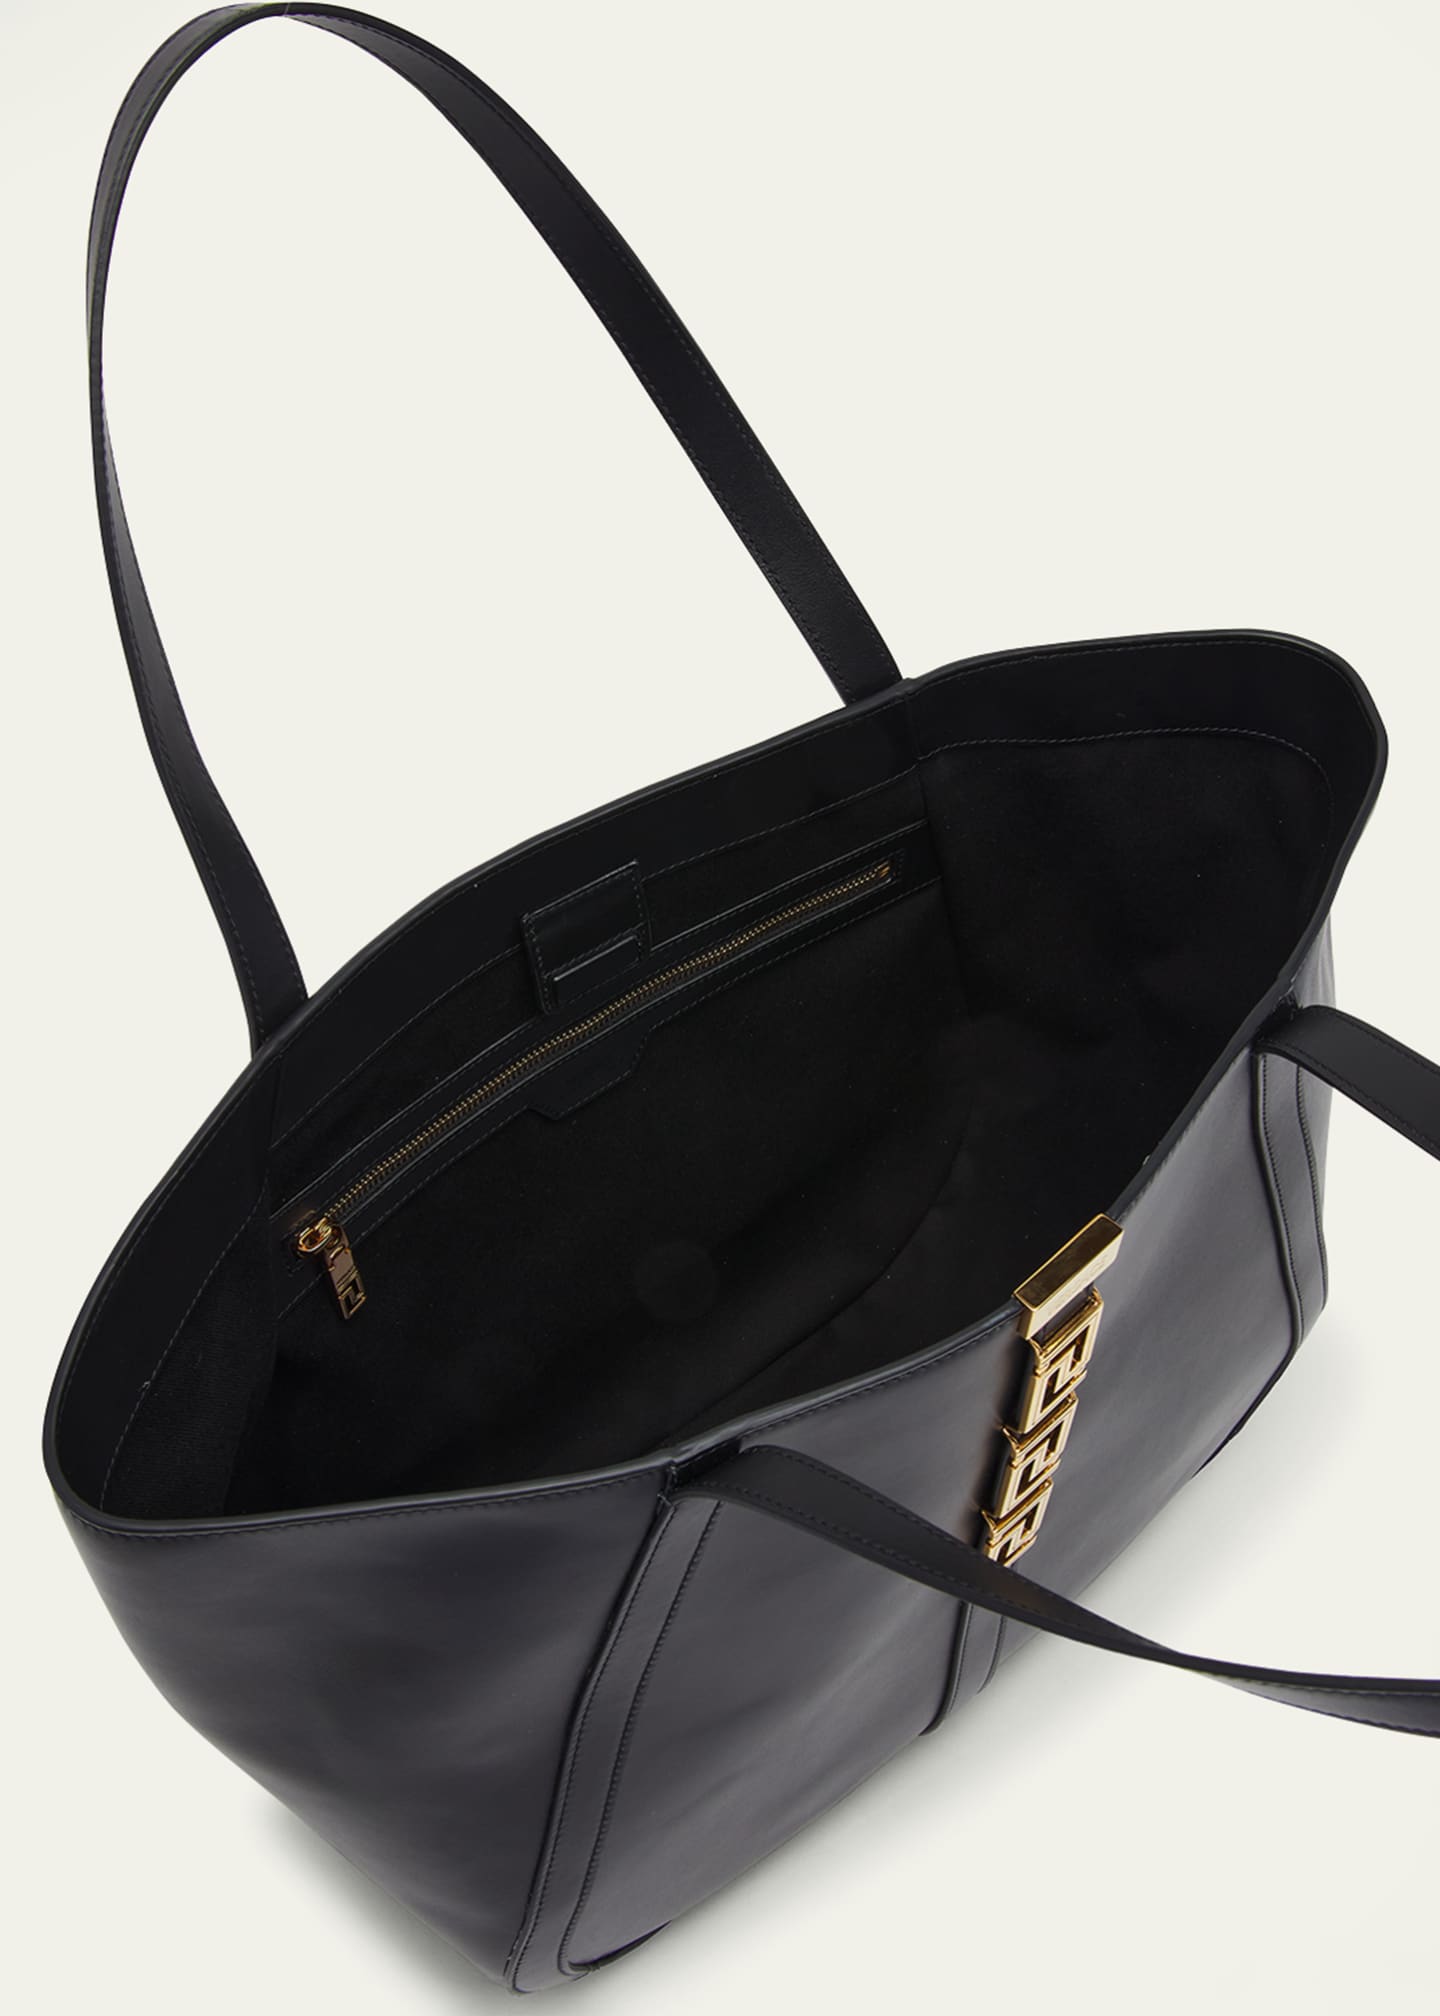 Versace Grecca Goddess Large Leather Tote Bag in Black